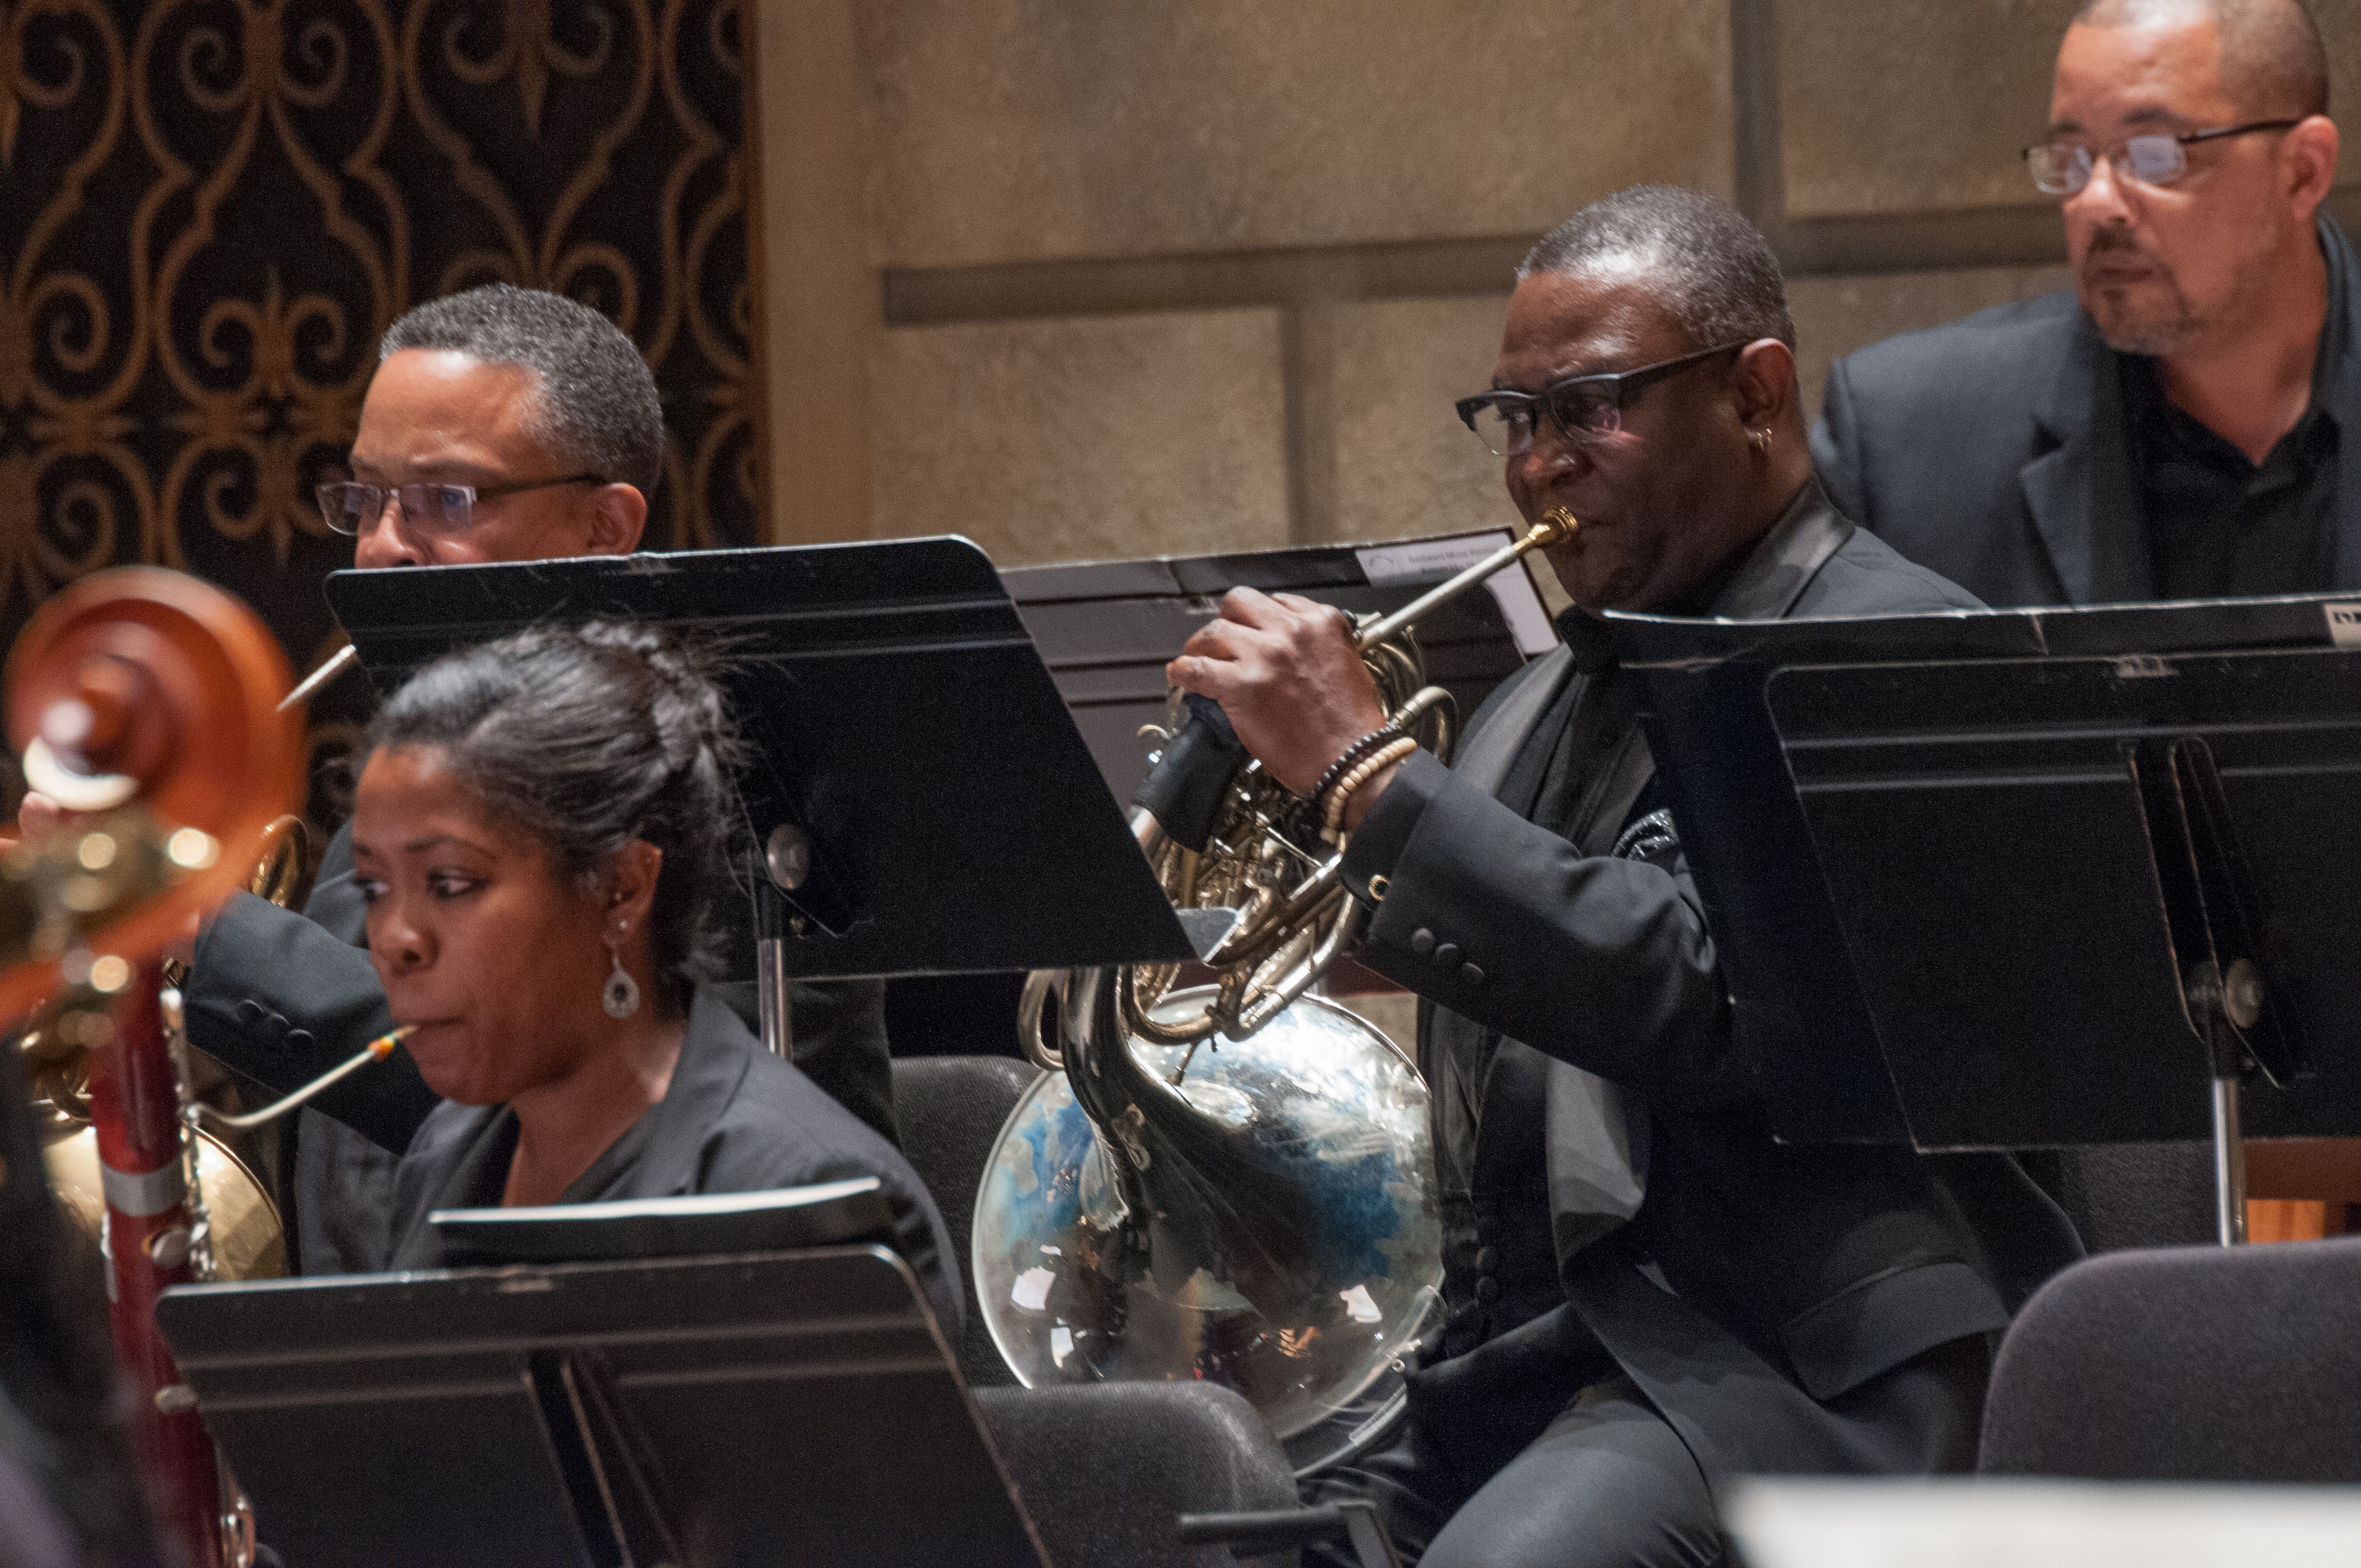 Members of the festival orchestra come from the United States, Europe, Canada, South America, and the Caribbean. (University photo / Keith Bullis)